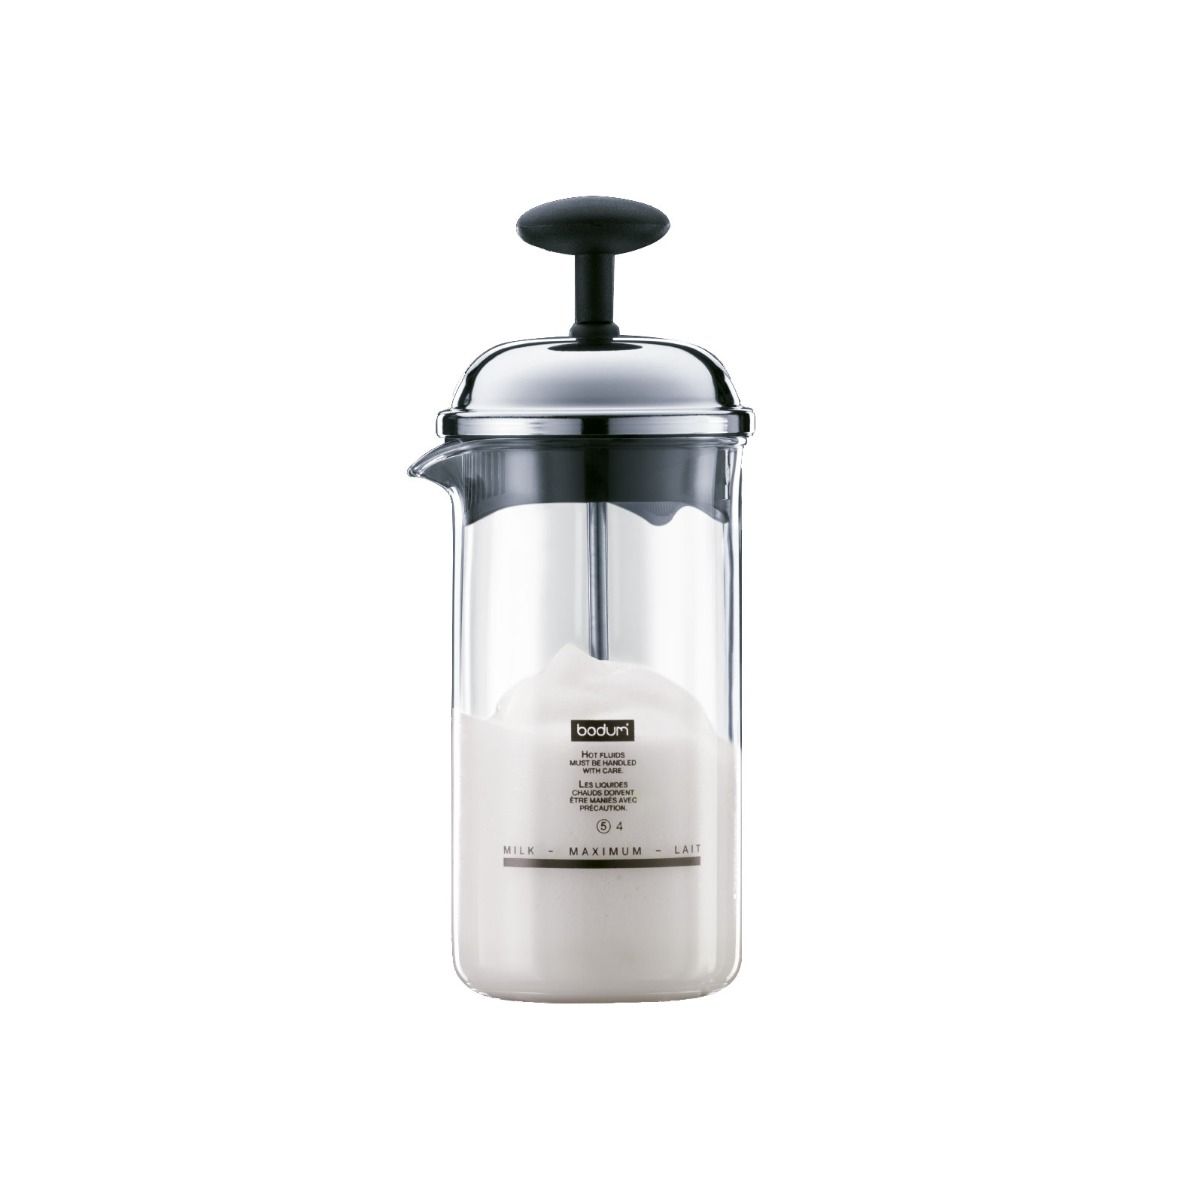 Bodum Latteo Manual Milk Frother Cappuccino Whisp 8 Oz.